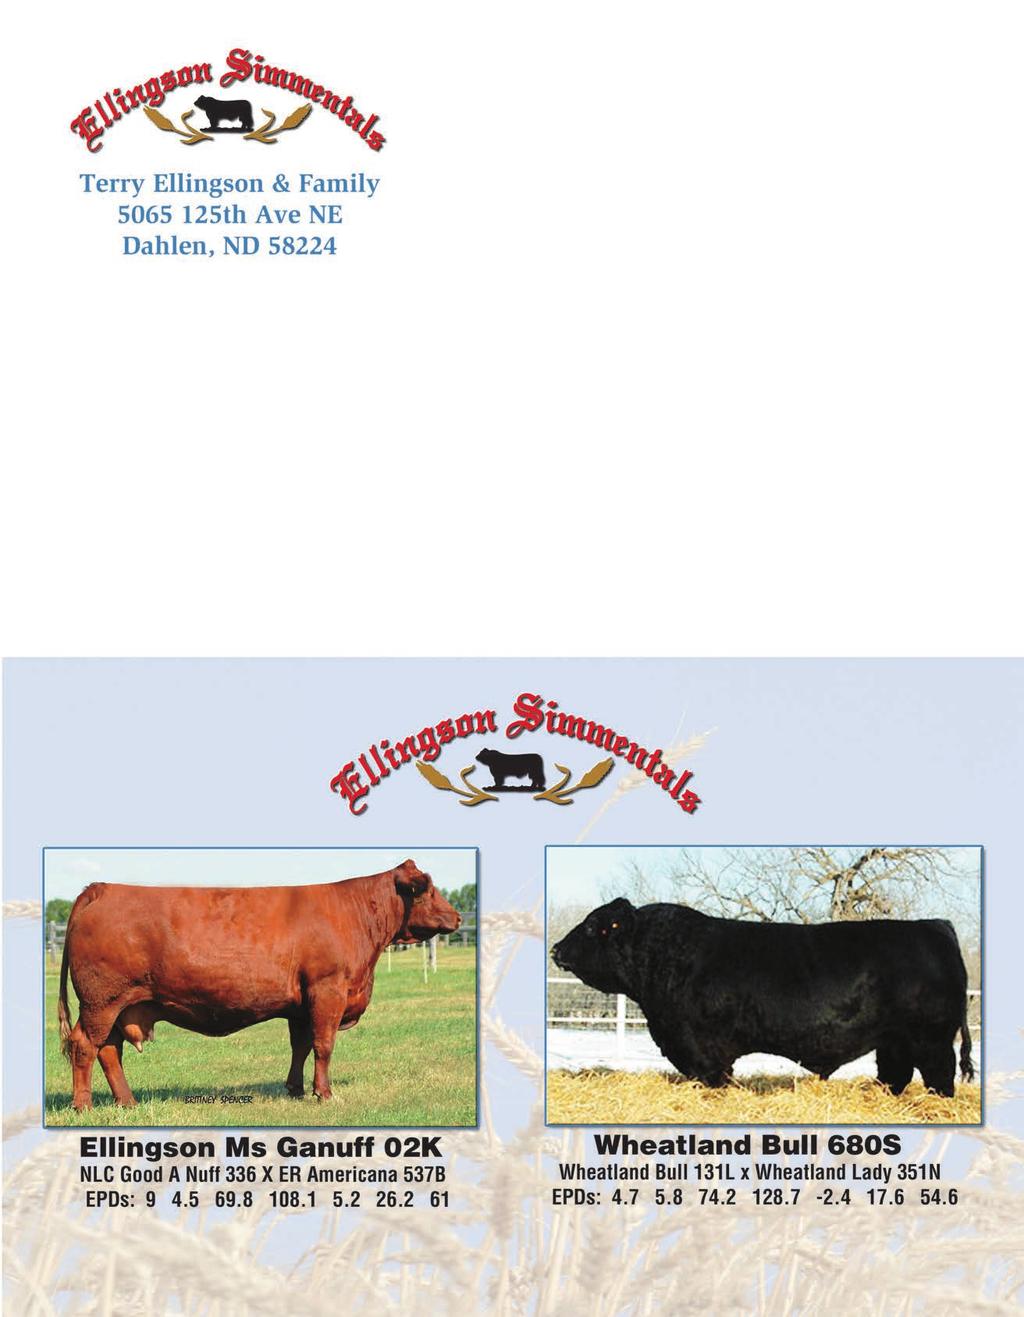 Printed by 2 Simmental Way, Bozeman, MT 59715 Phone: 406-587-2778 Fax: